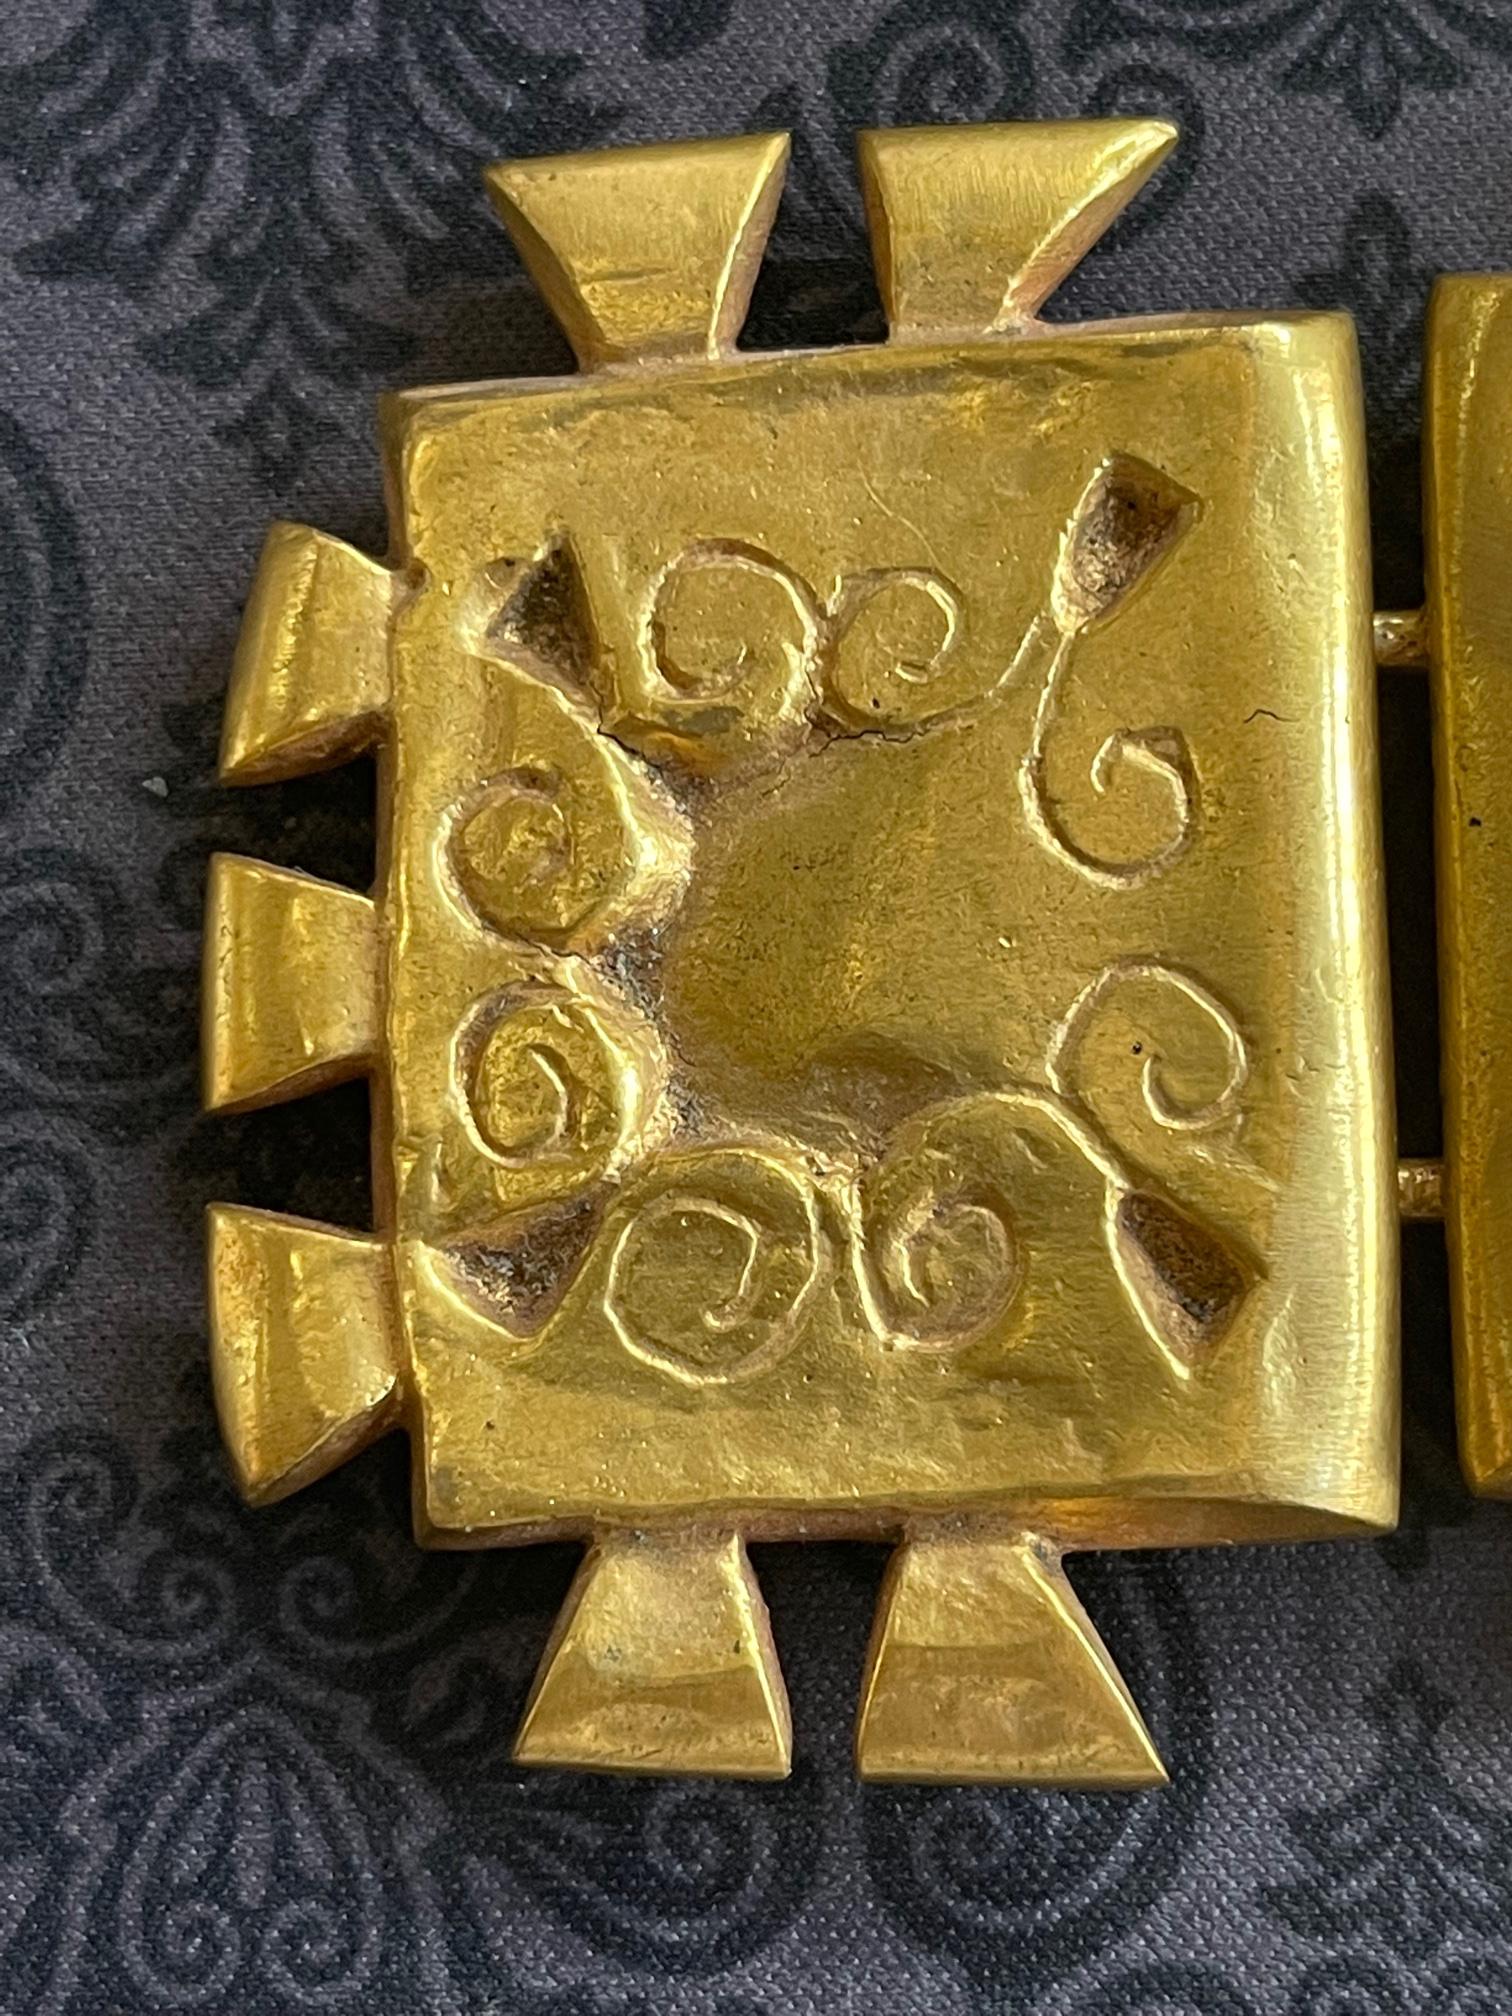 A cast bronze two-piece bronze buckle with hook and loop verso by French art jeweler Line Vautrin (1913-1997). The sculptural pieces are In a rare Inca motif, with triangular indentation in contrast with scrolling lines and wedge-shape protrusions